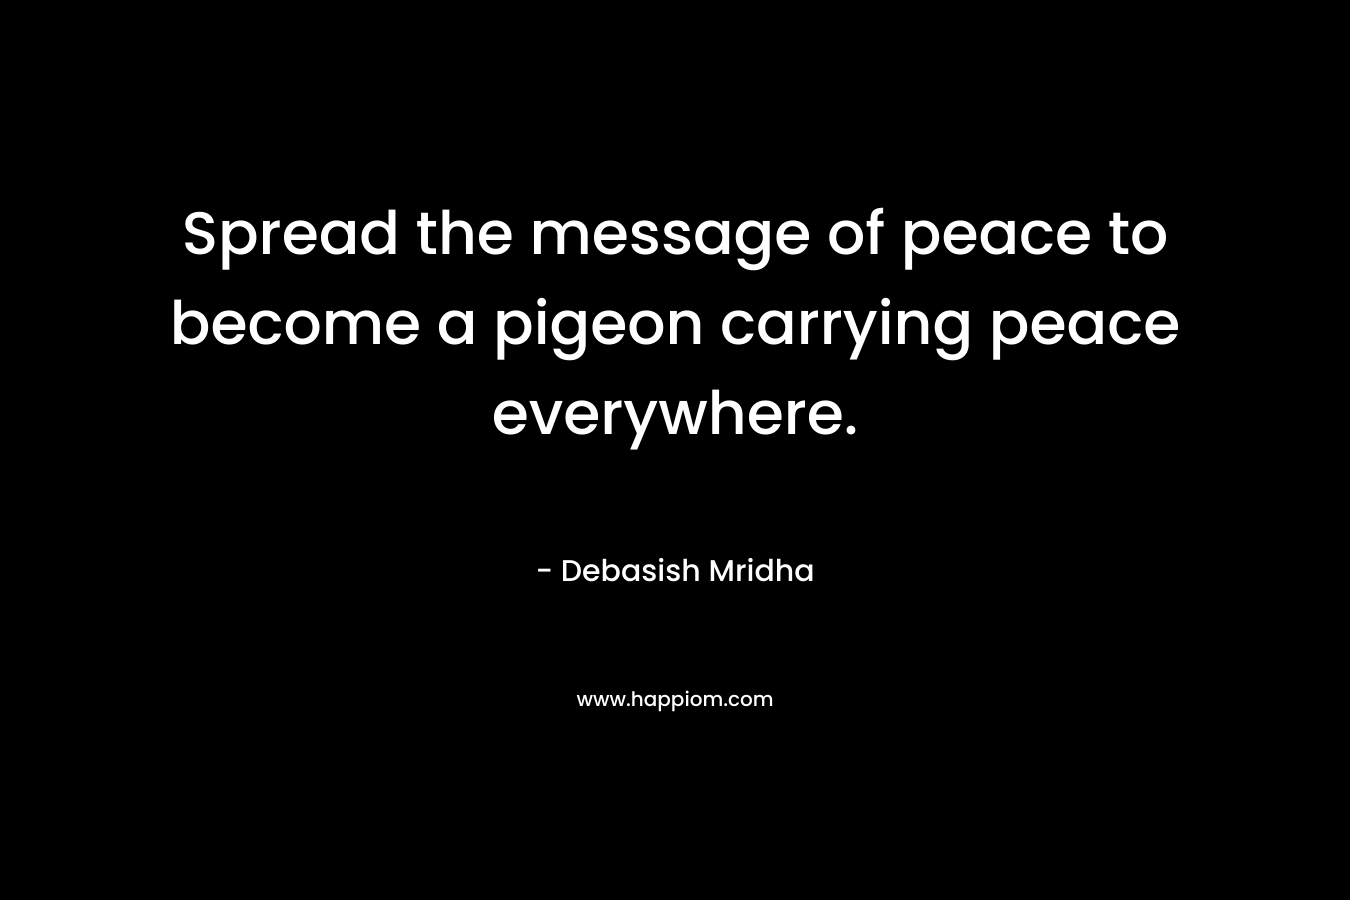 Spread the message of peace to become a pigeon carrying peace everywhere. – Debasish Mridha